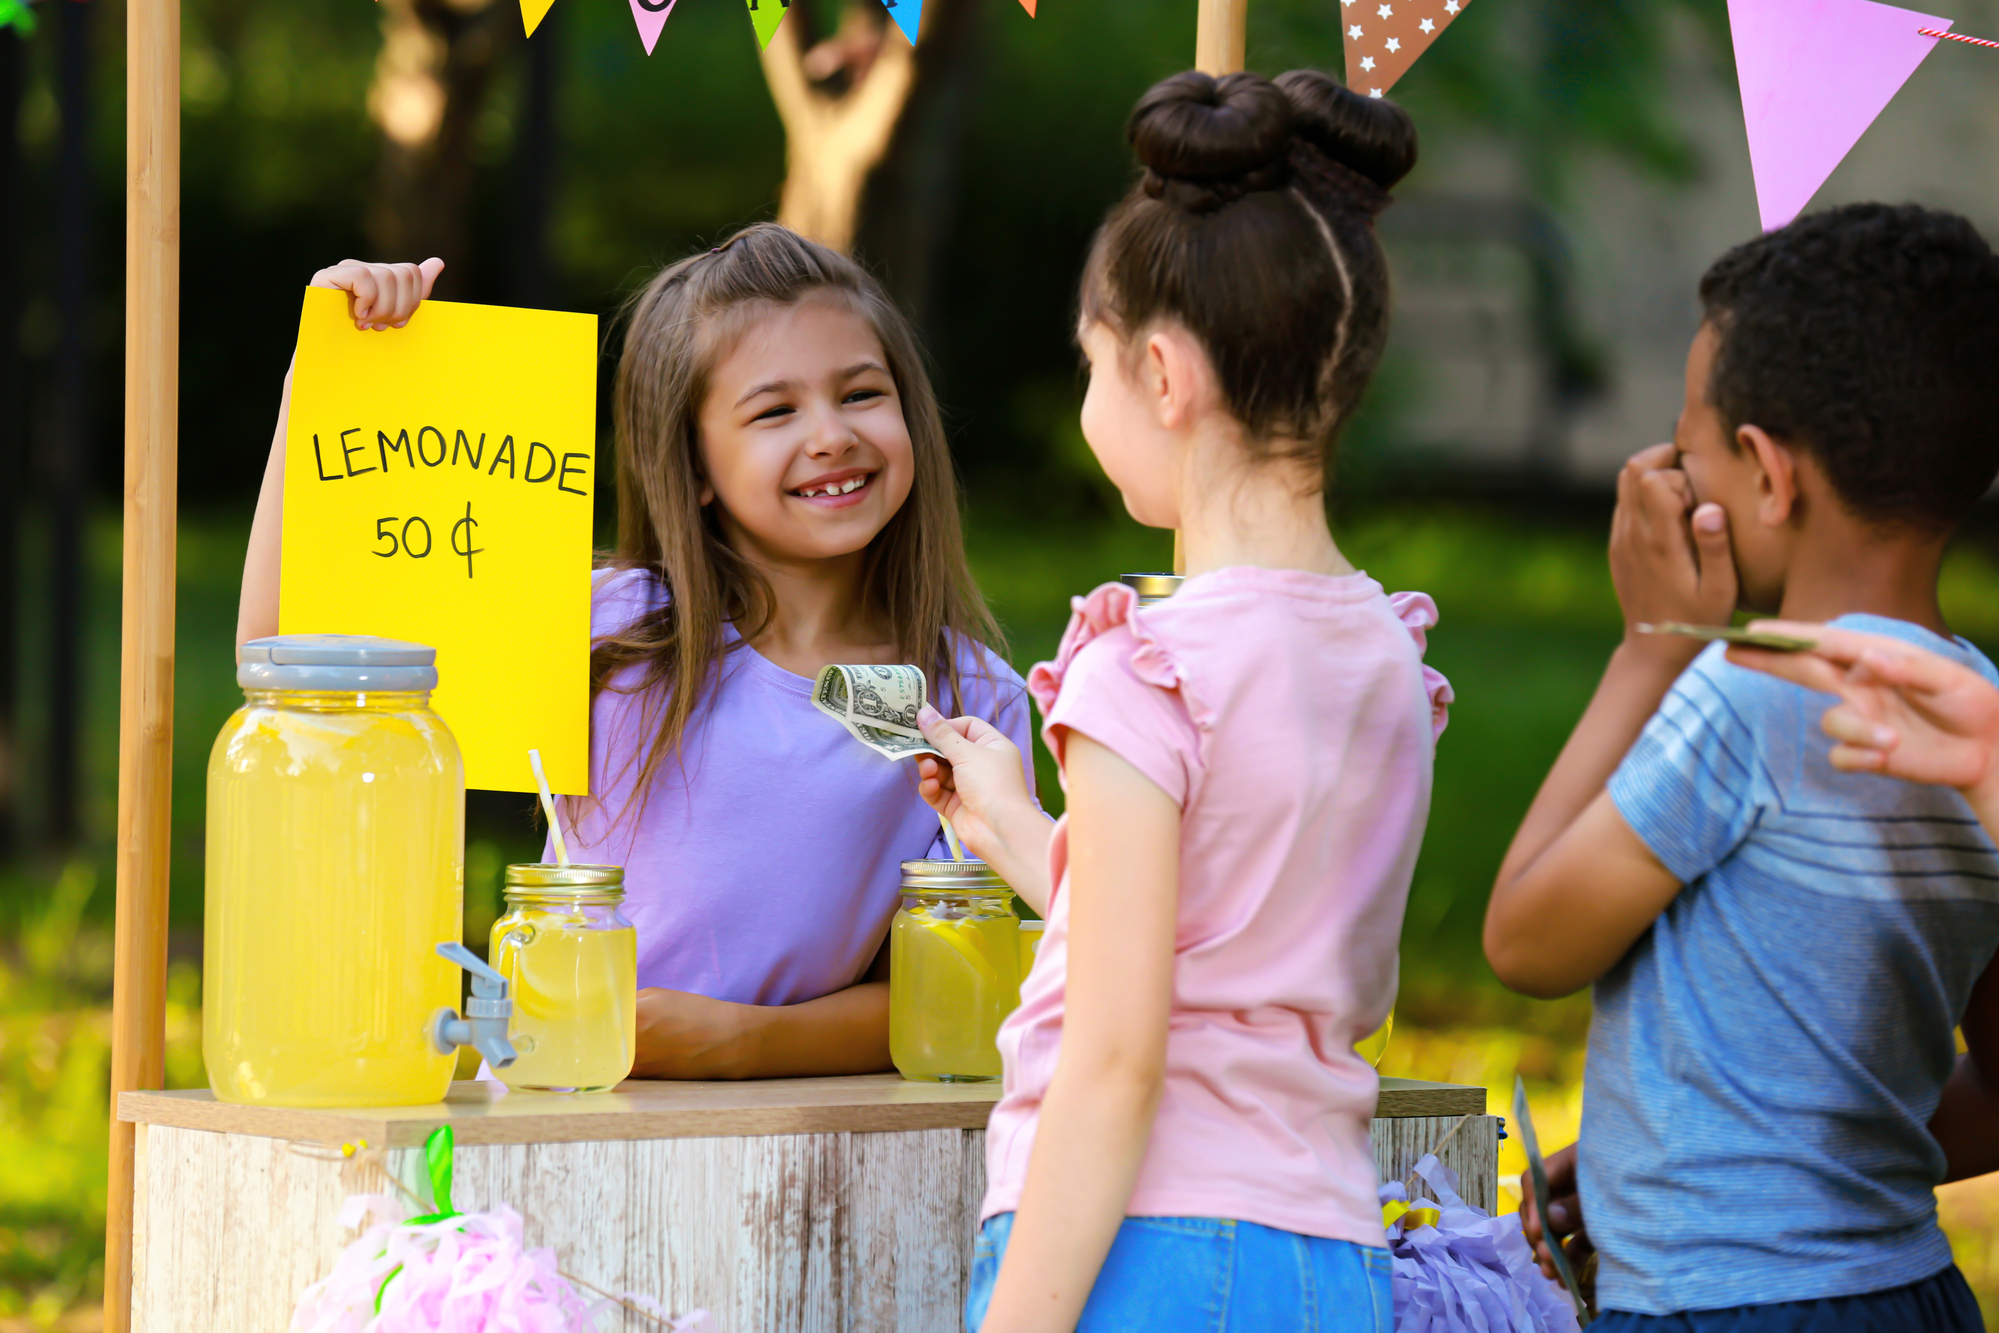 Kids with big smiles having a lemonade stand in the summer.